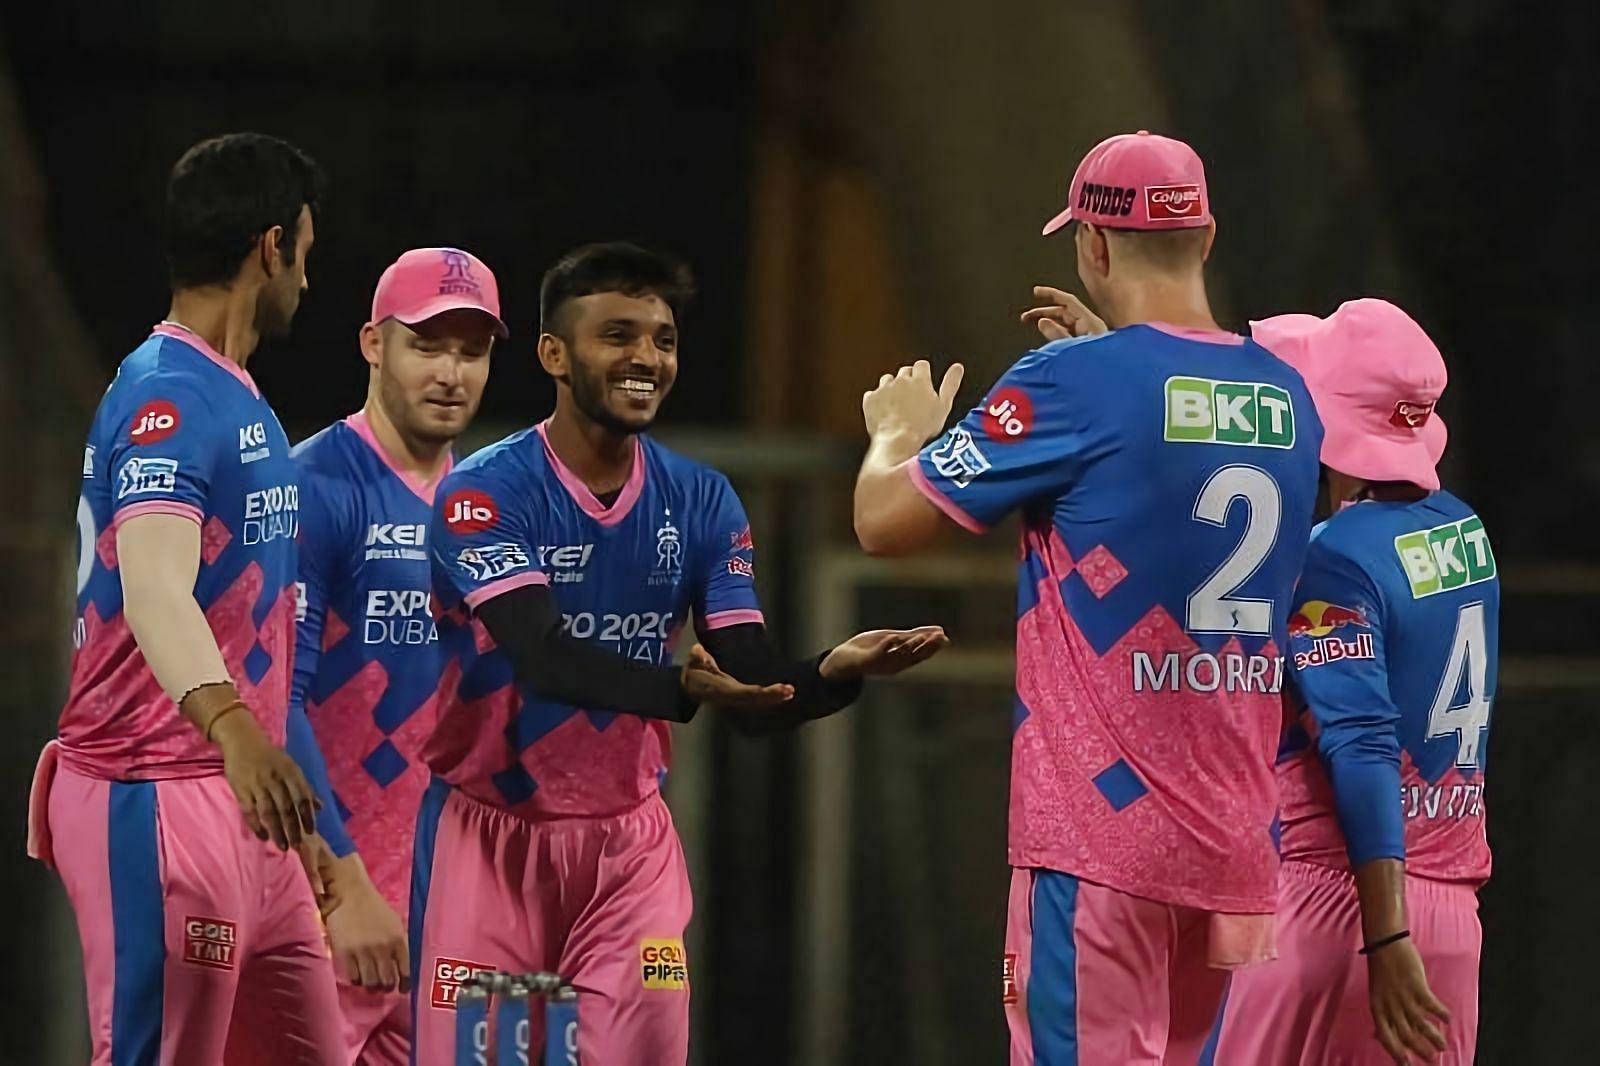 Rajasthan Royals (RR) players celebrating a wicket. Pic: IPLT20.COM